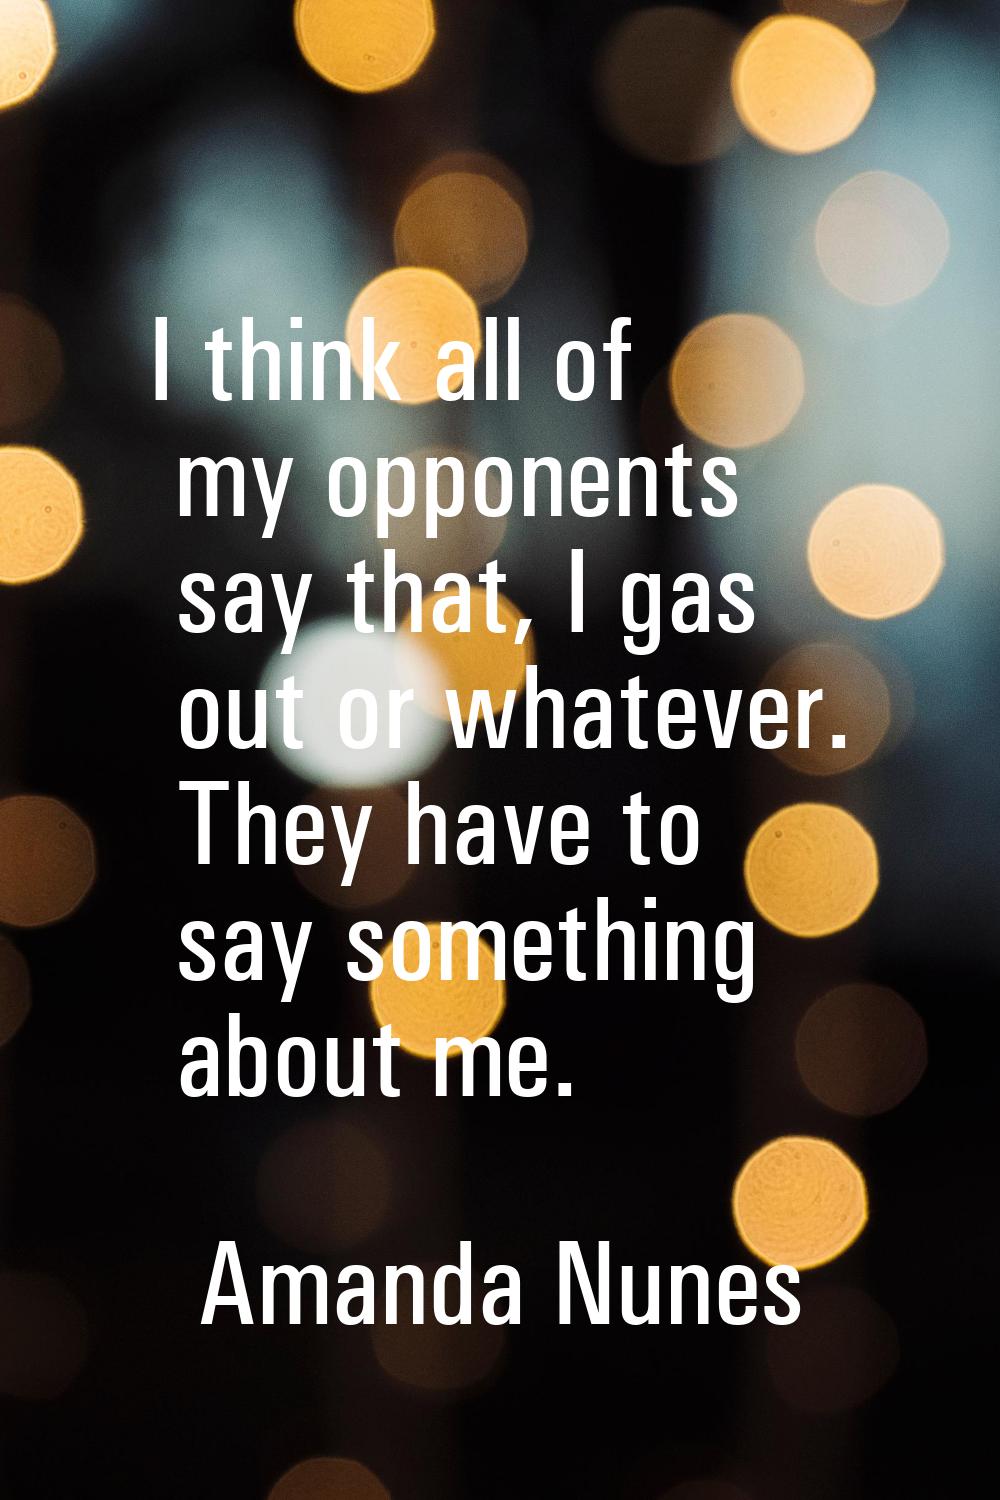 I think all of my opponents say that, I gas out or whatever. They have to say something about me.